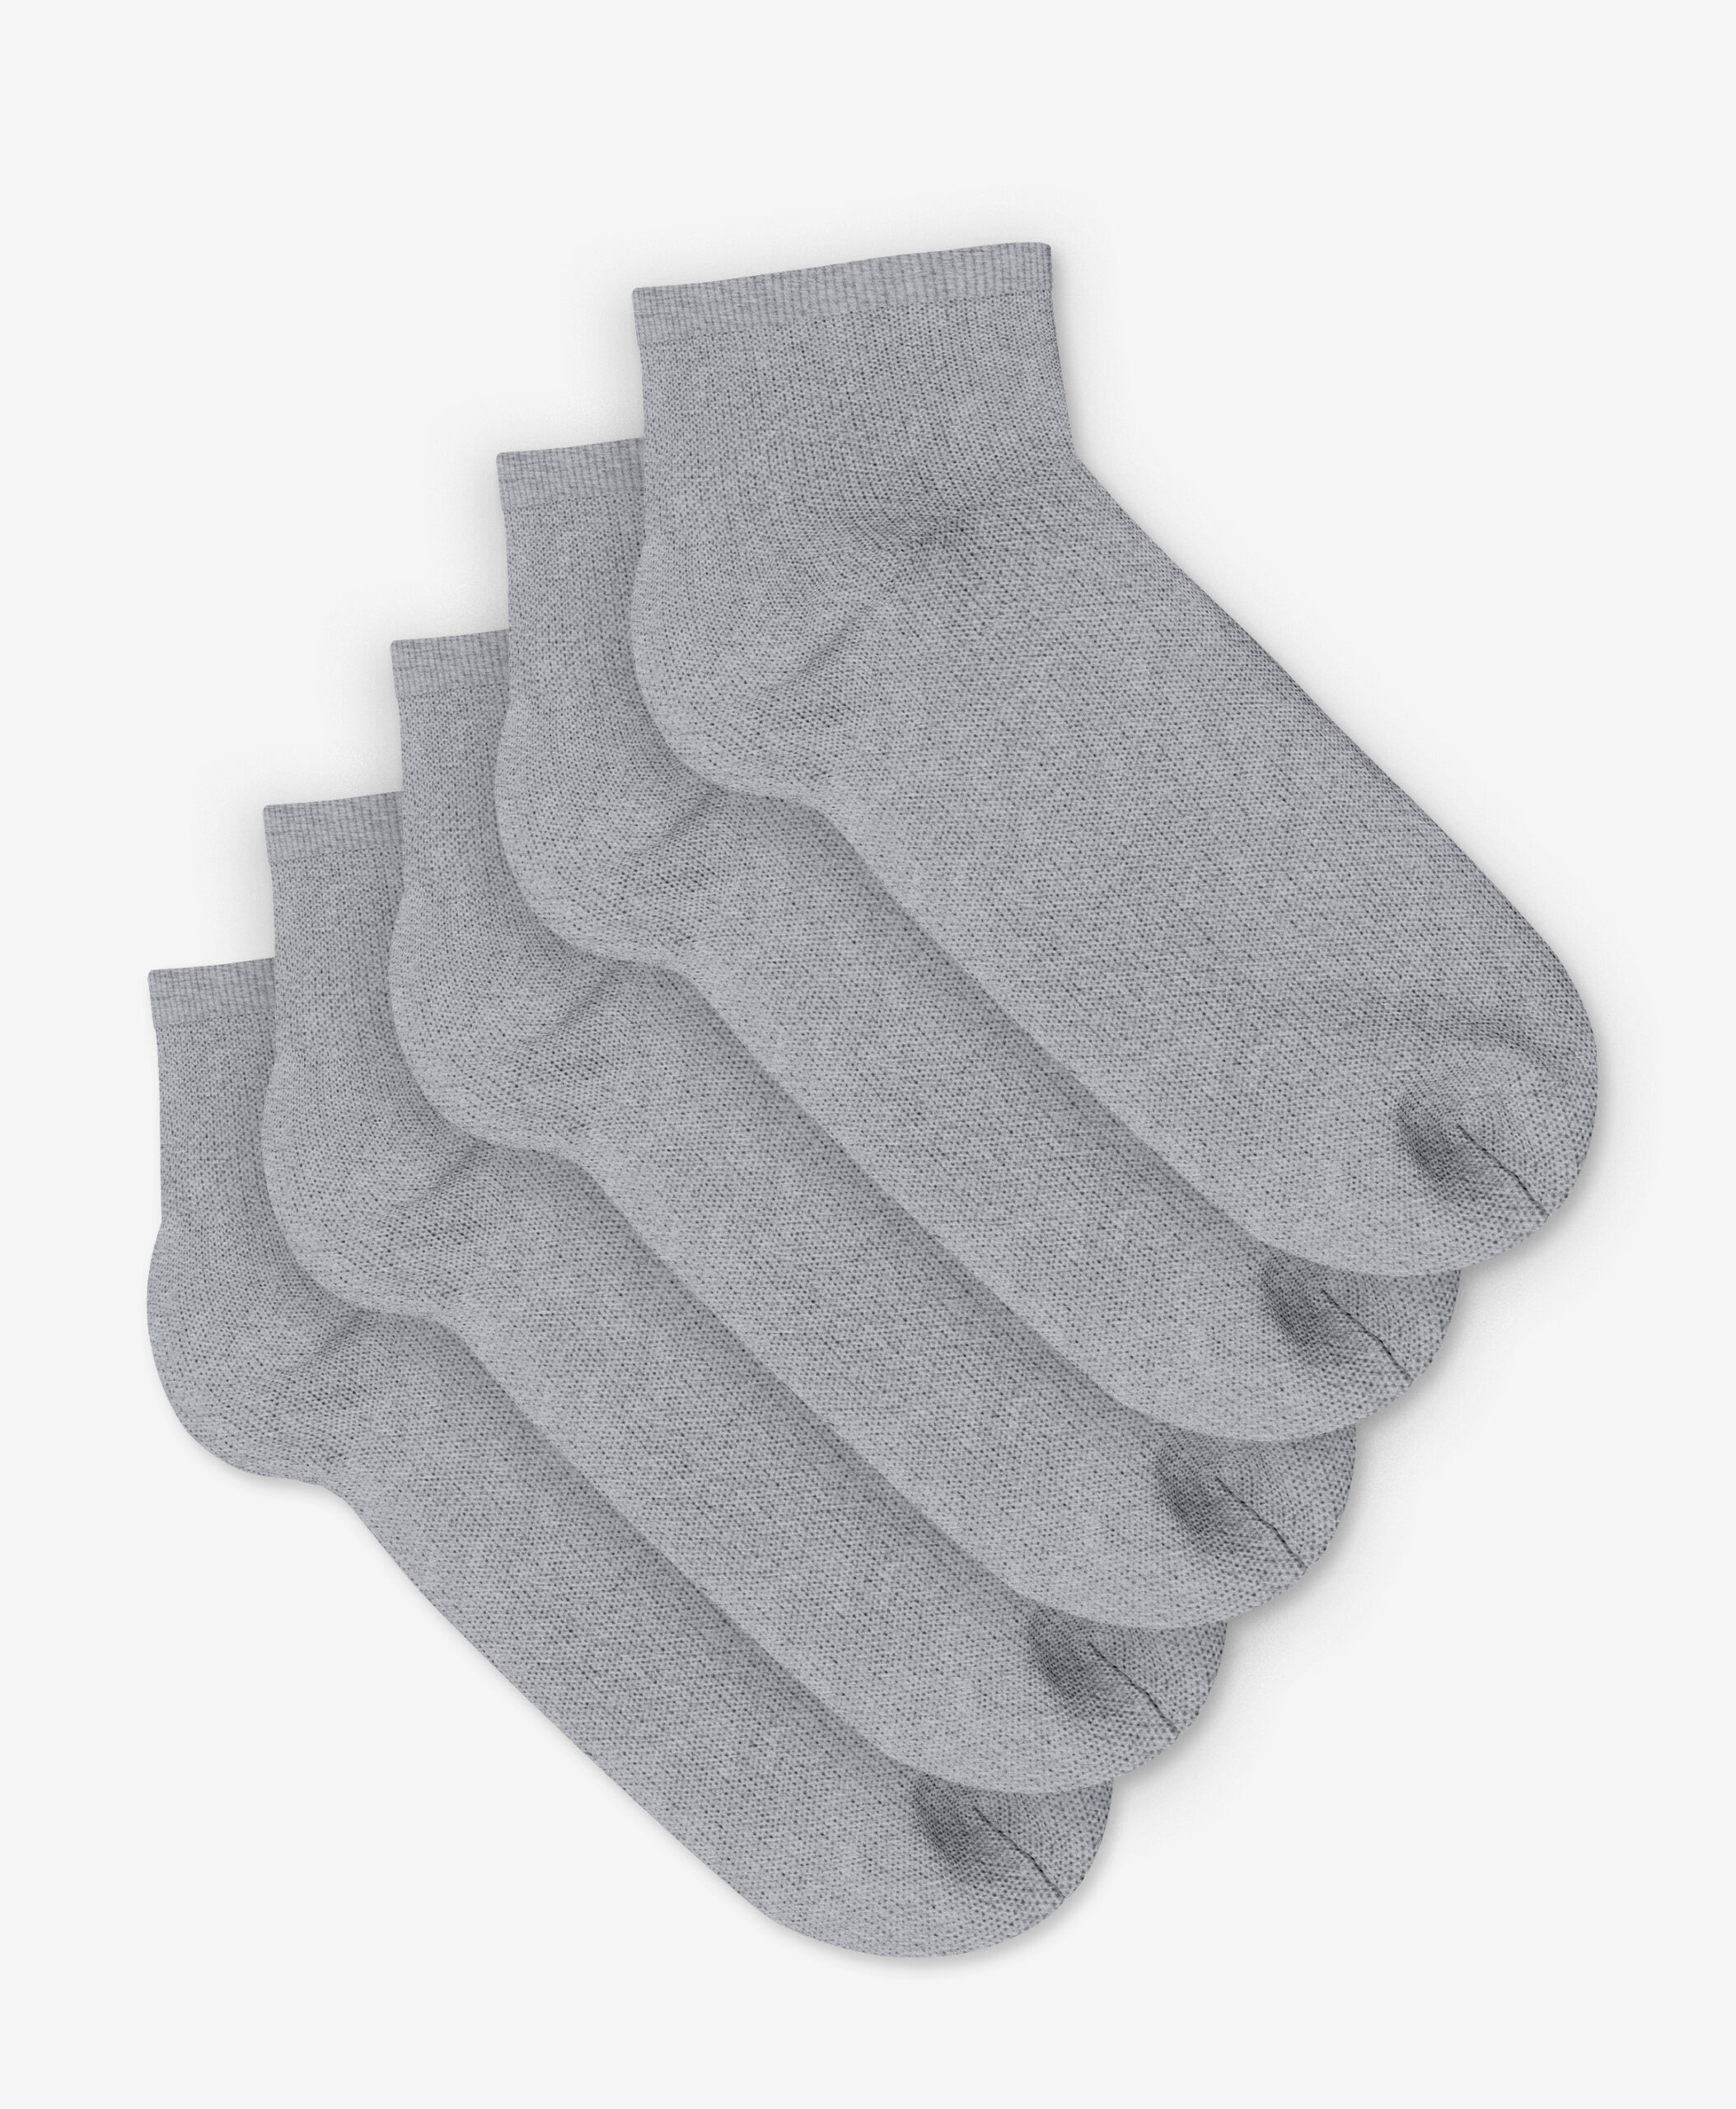 Pack 2 calcetines Carlomagno gris